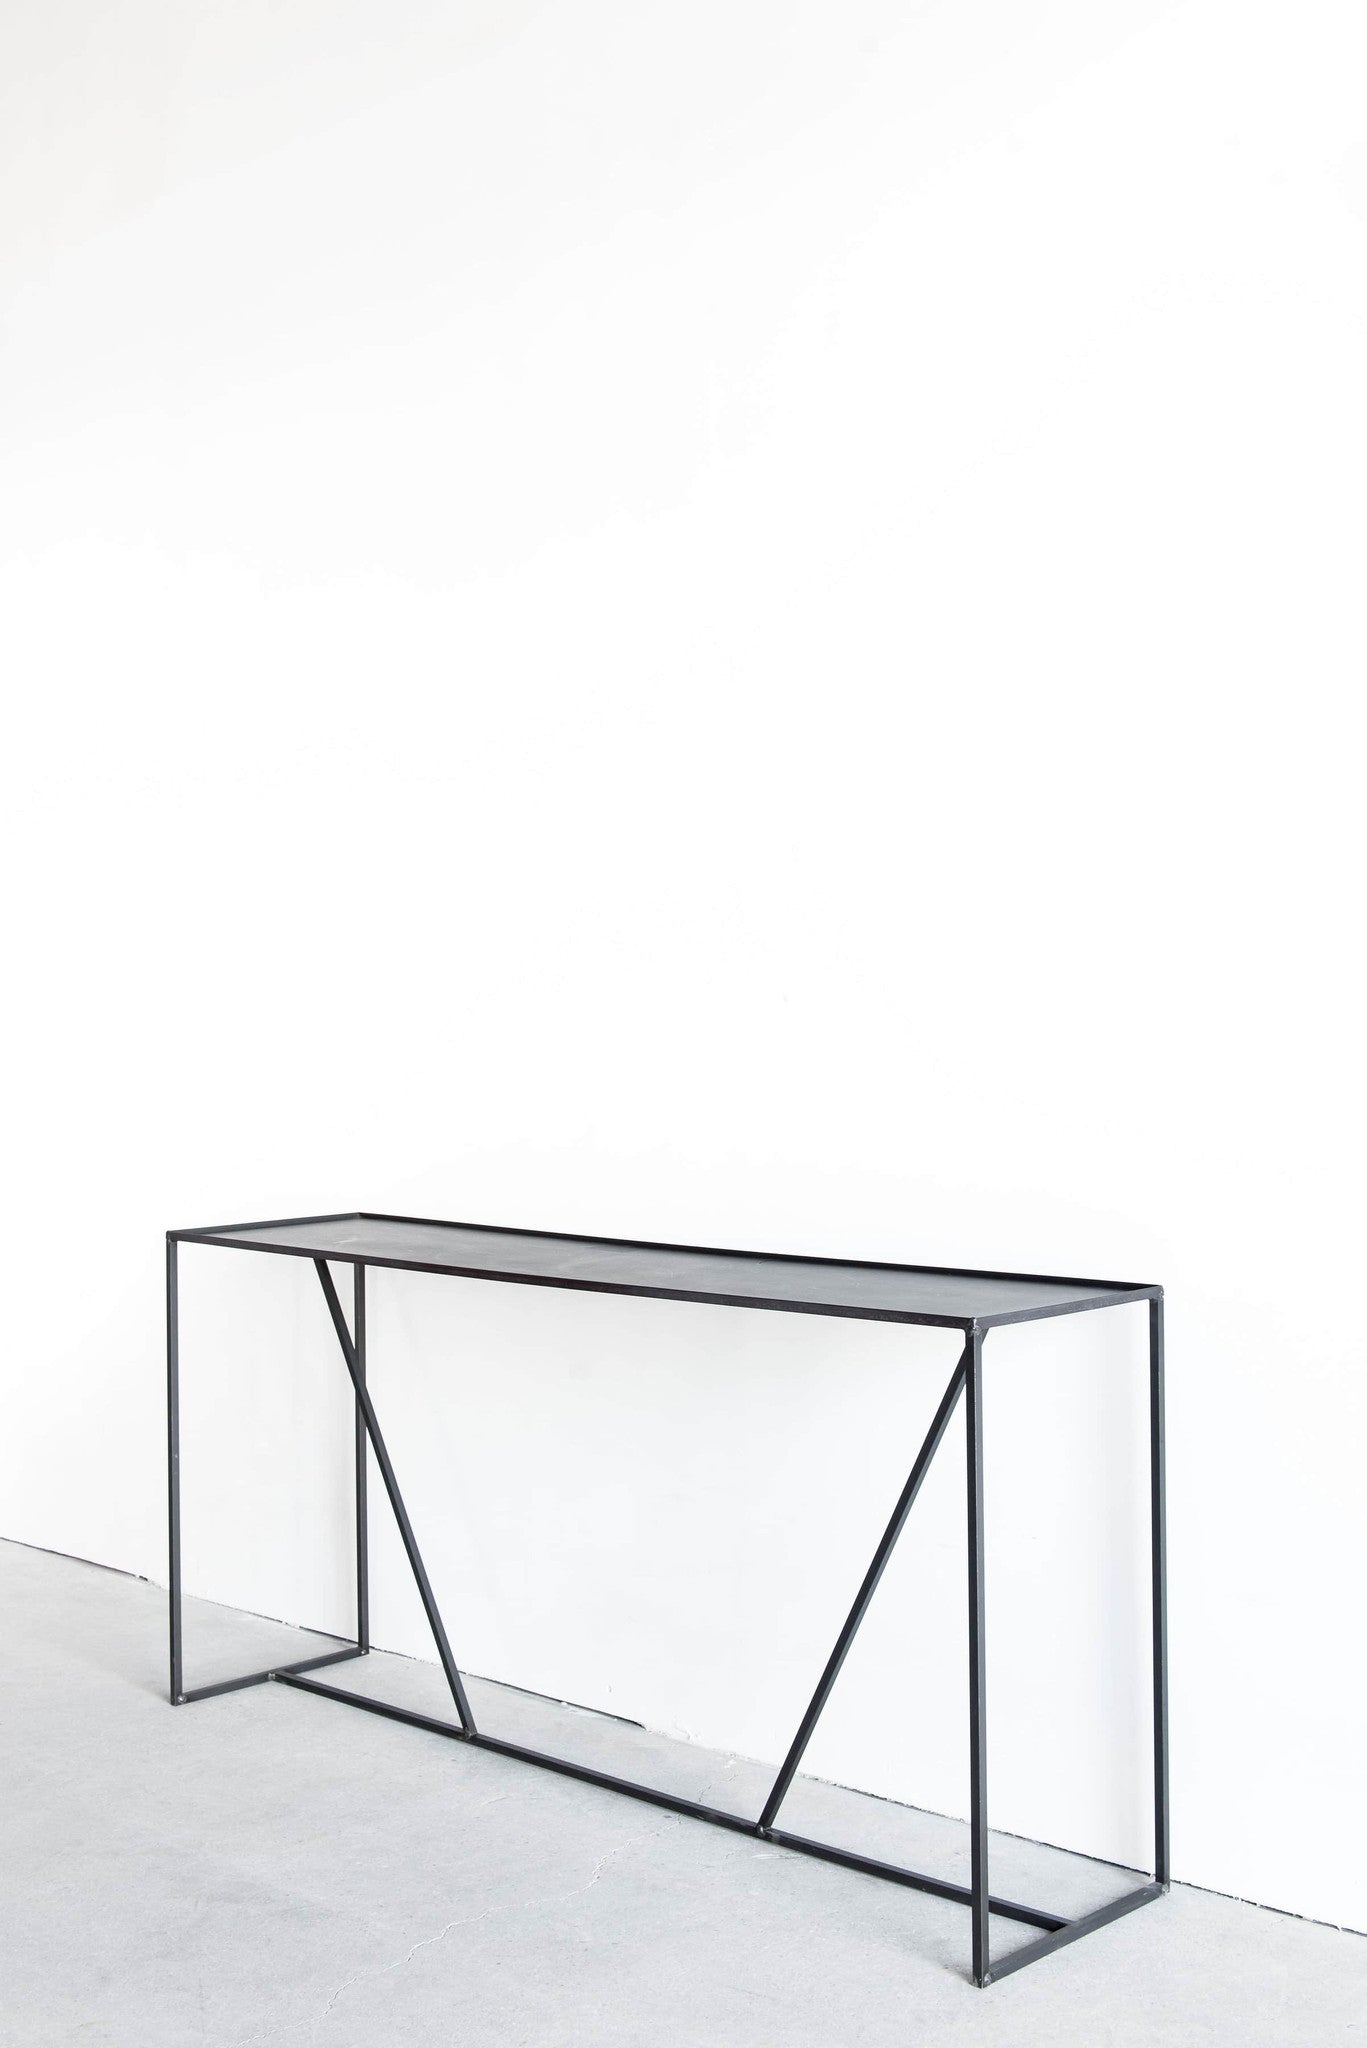 Arden Console steel table corner view